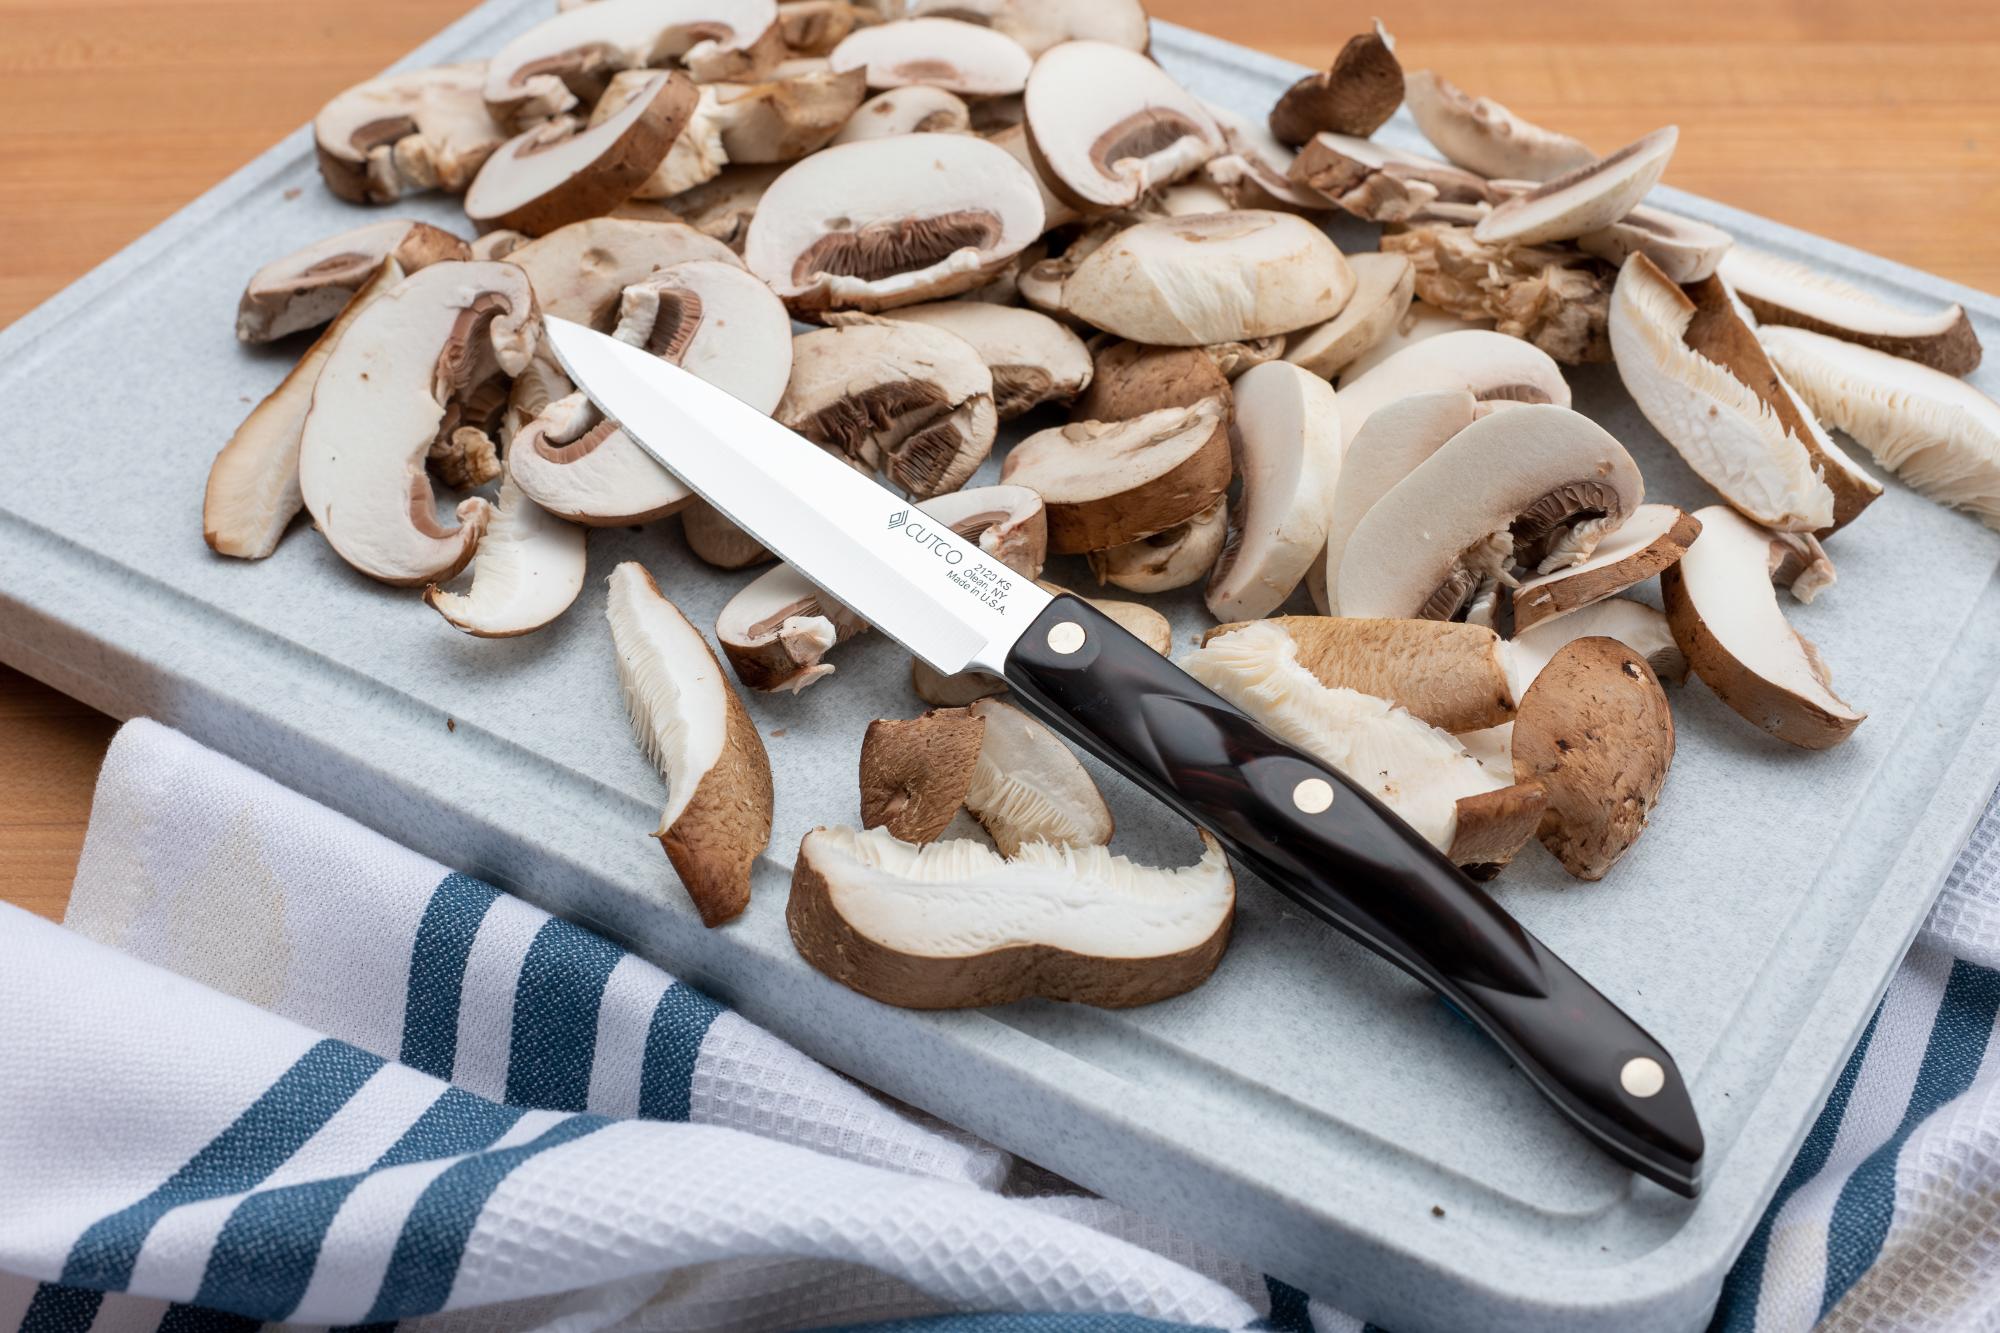 Sliced mushrooms with a 4 Inch Paring Knife.